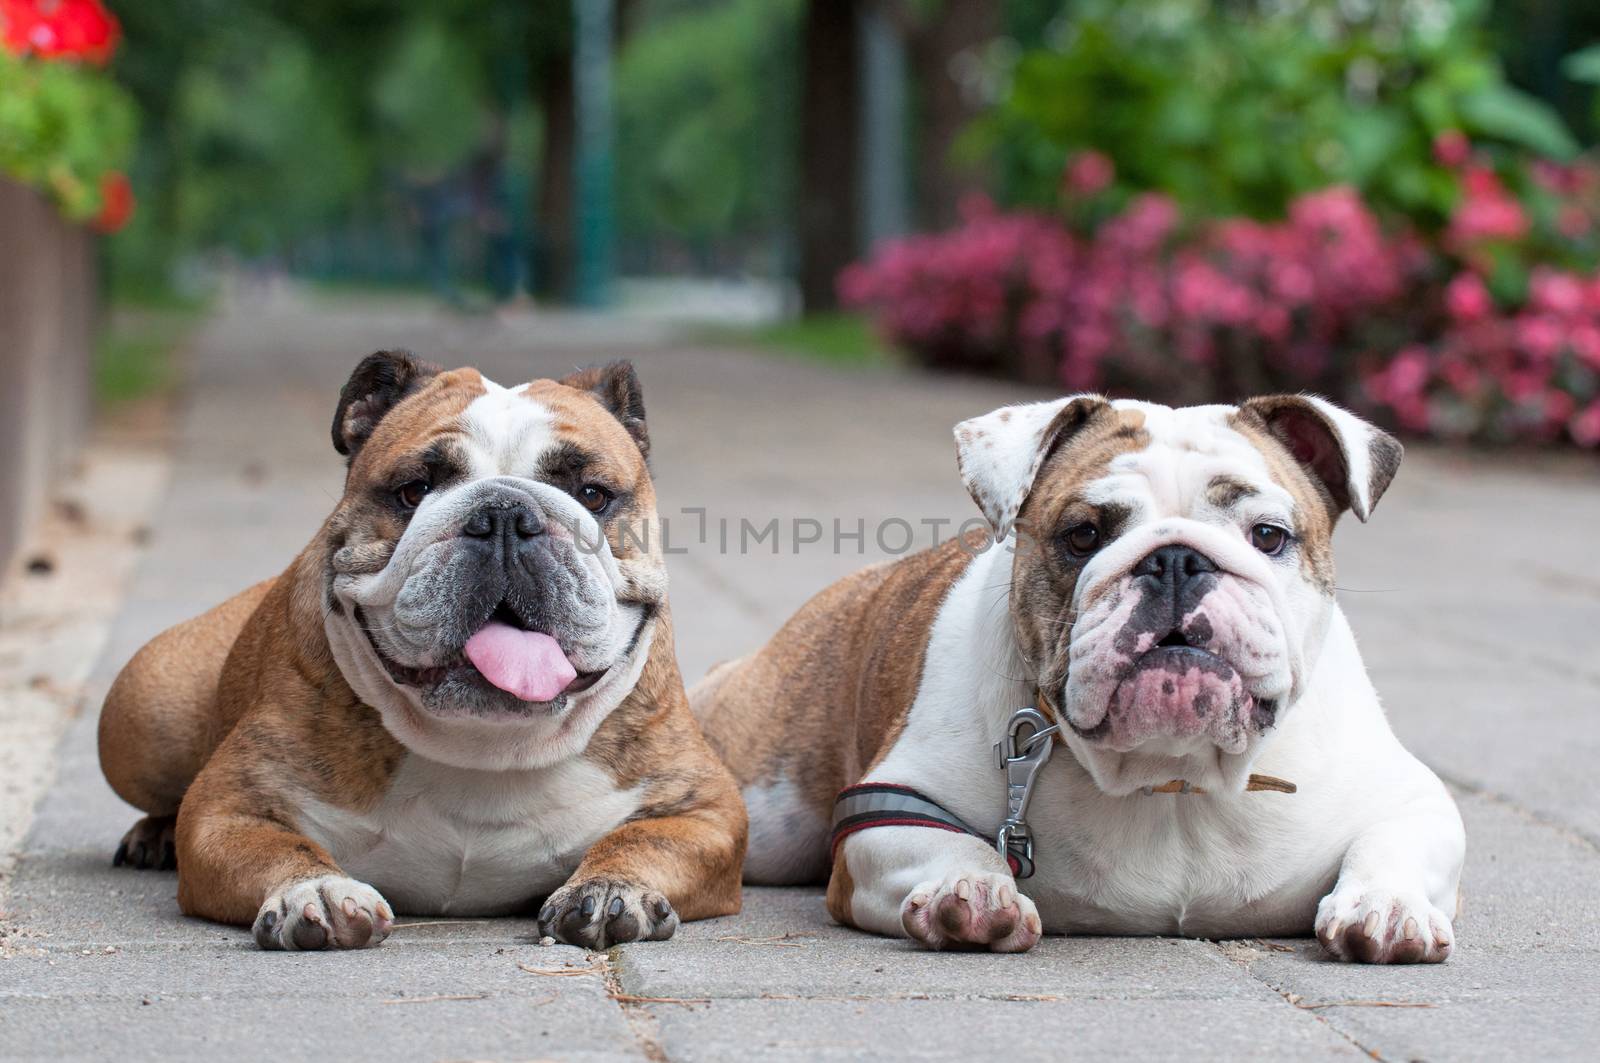 Two funny English Bulldogs or British Bulldogs dogs in the park near the flowers